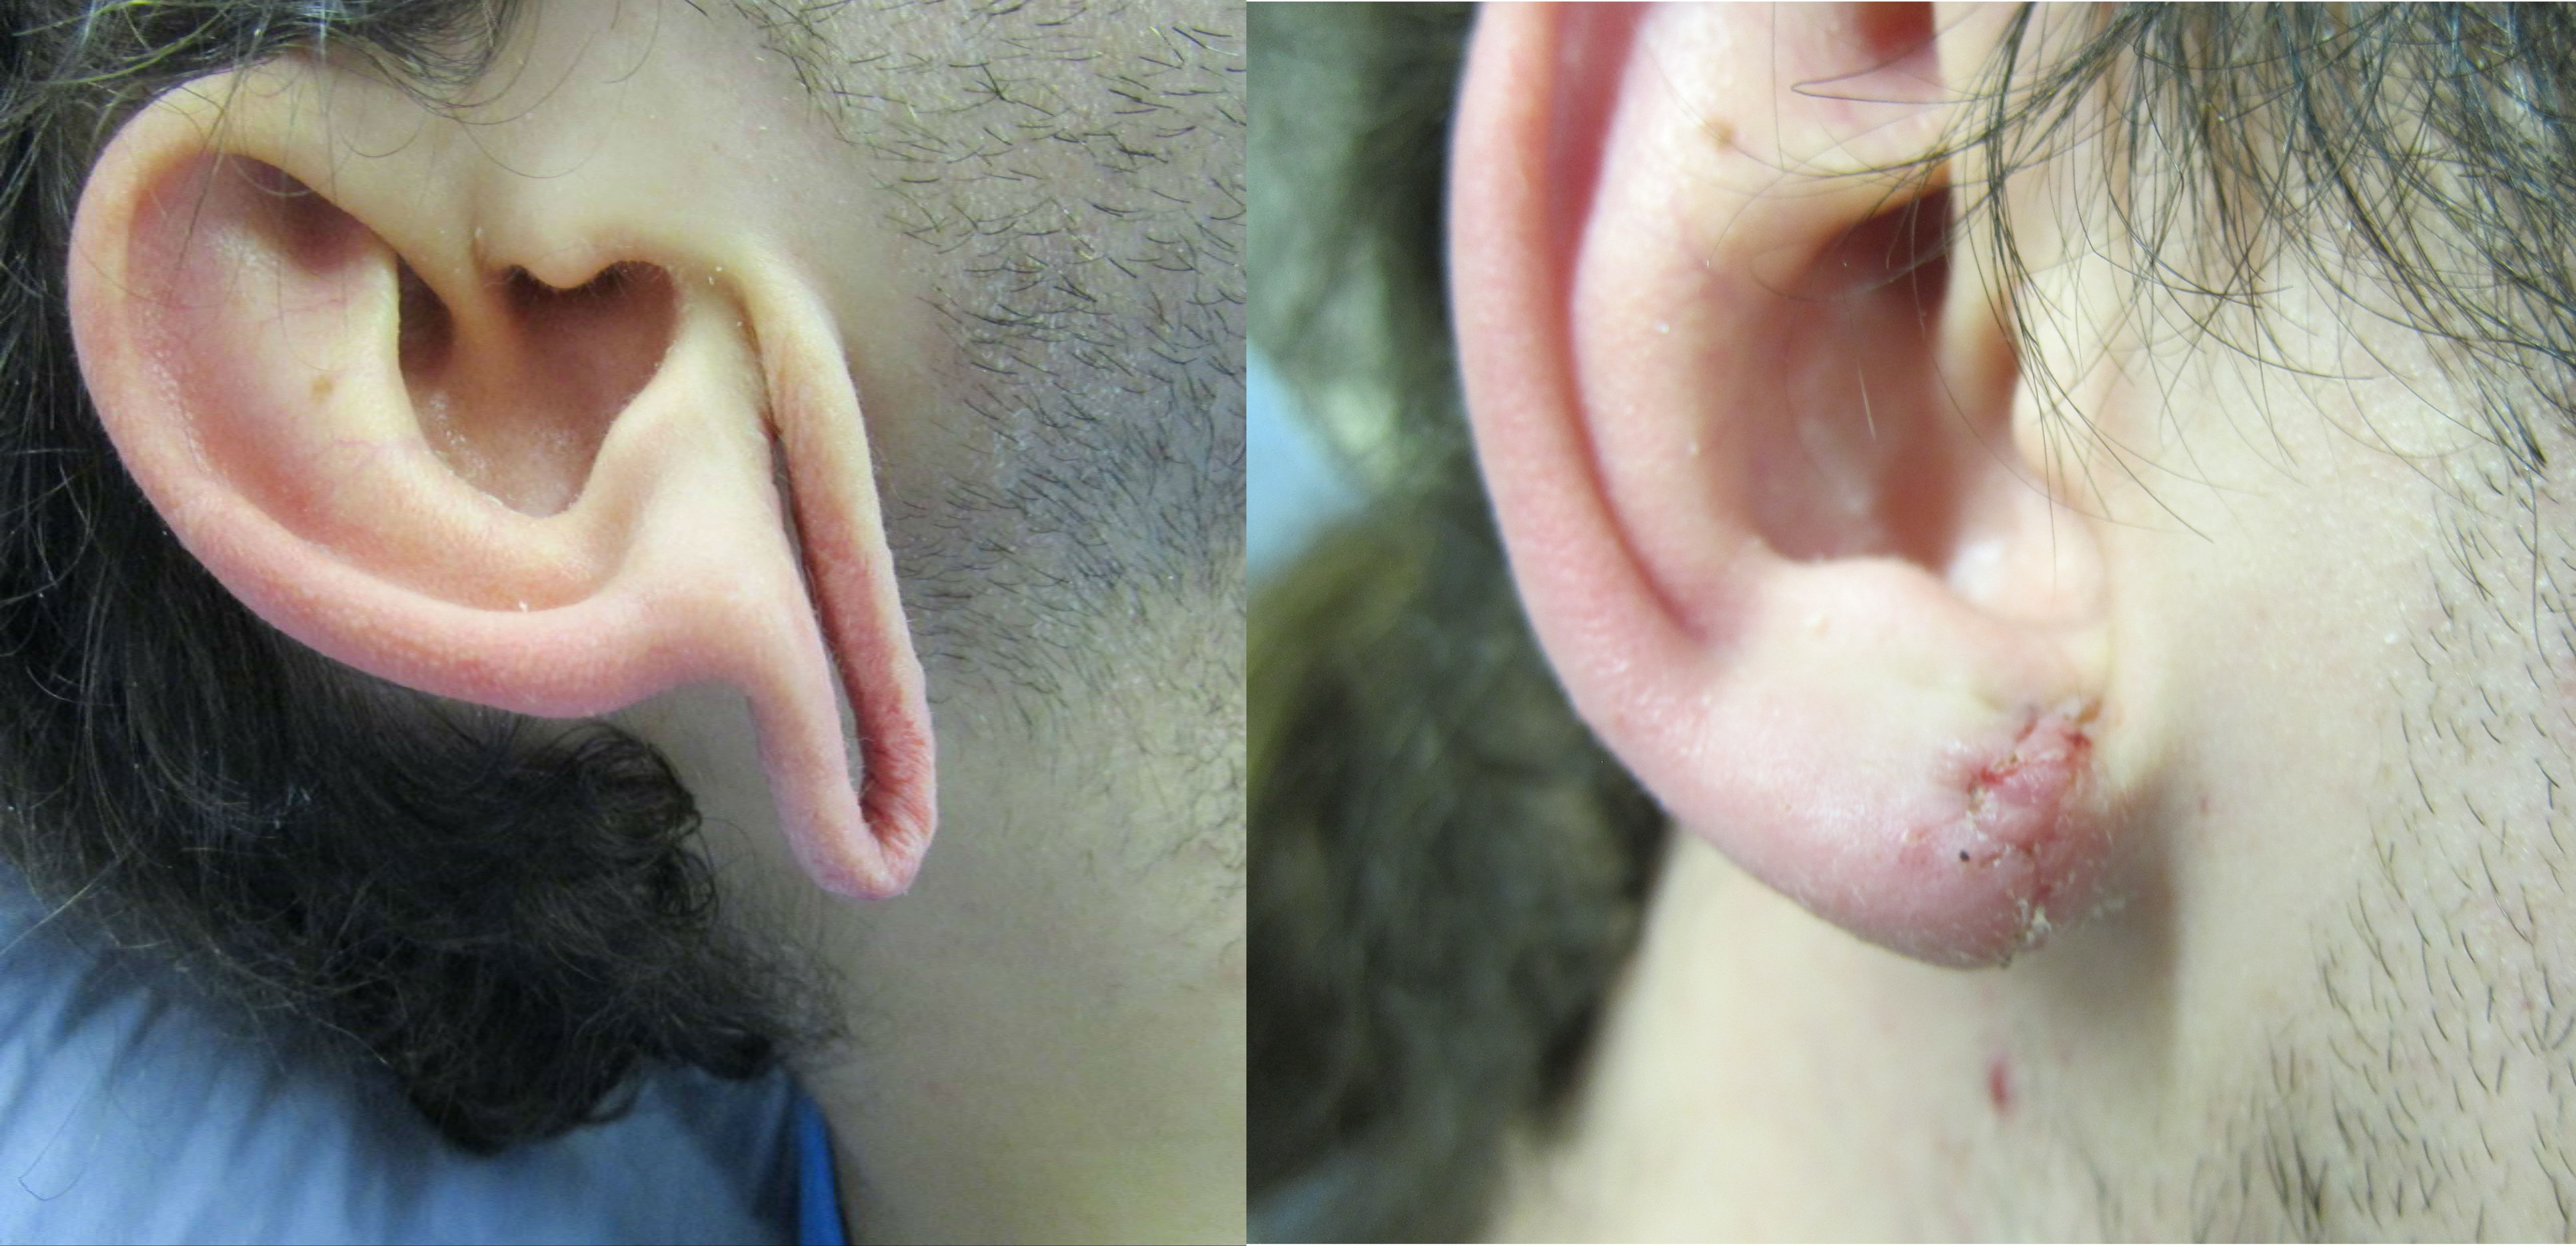 Earlobe Repair | Otoplasty (Earlobe repair): Otoplasty aims to reshape and  reposition the ears for a more balanced and symmetrical look. The Otoplasty  procedure is... | By South Florida Oral & Facial